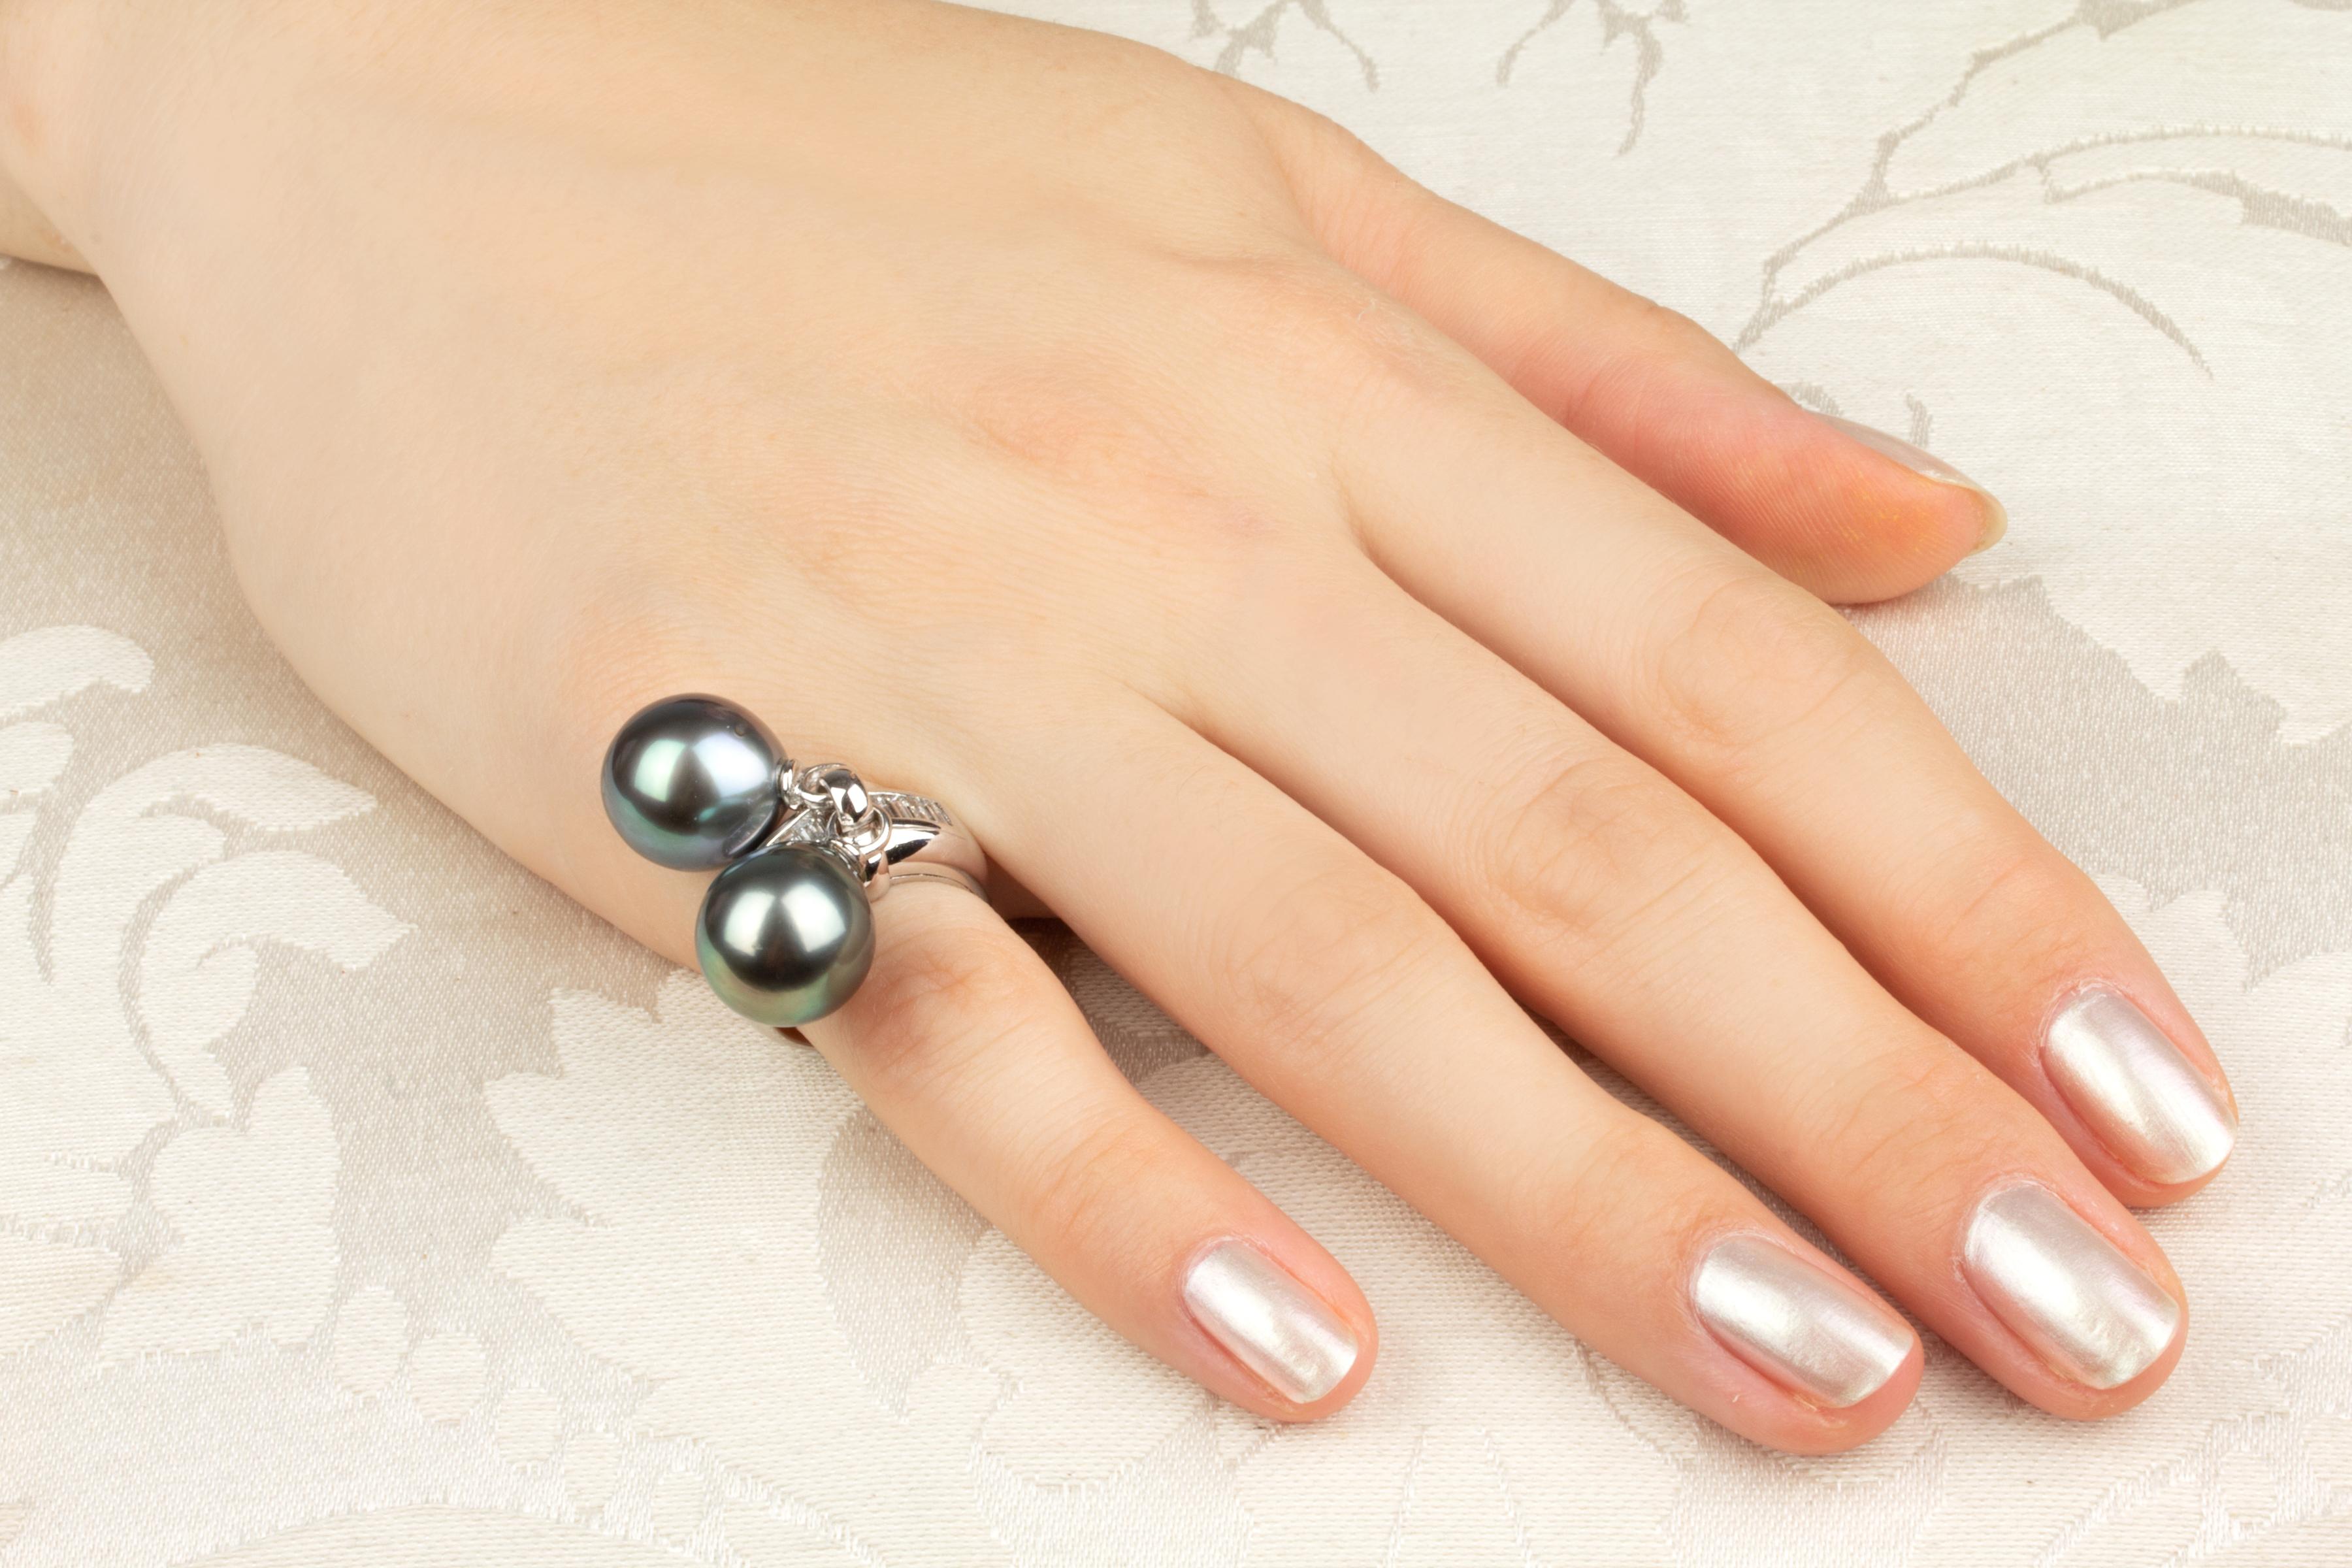 This Tahitian pearl and diamond ring features two pearls of 13mm diameter. The pearls are untreated. They display a fine luster and their natural color has not been enhanced in any way. Each pearl is separately attached to the center of the ring,